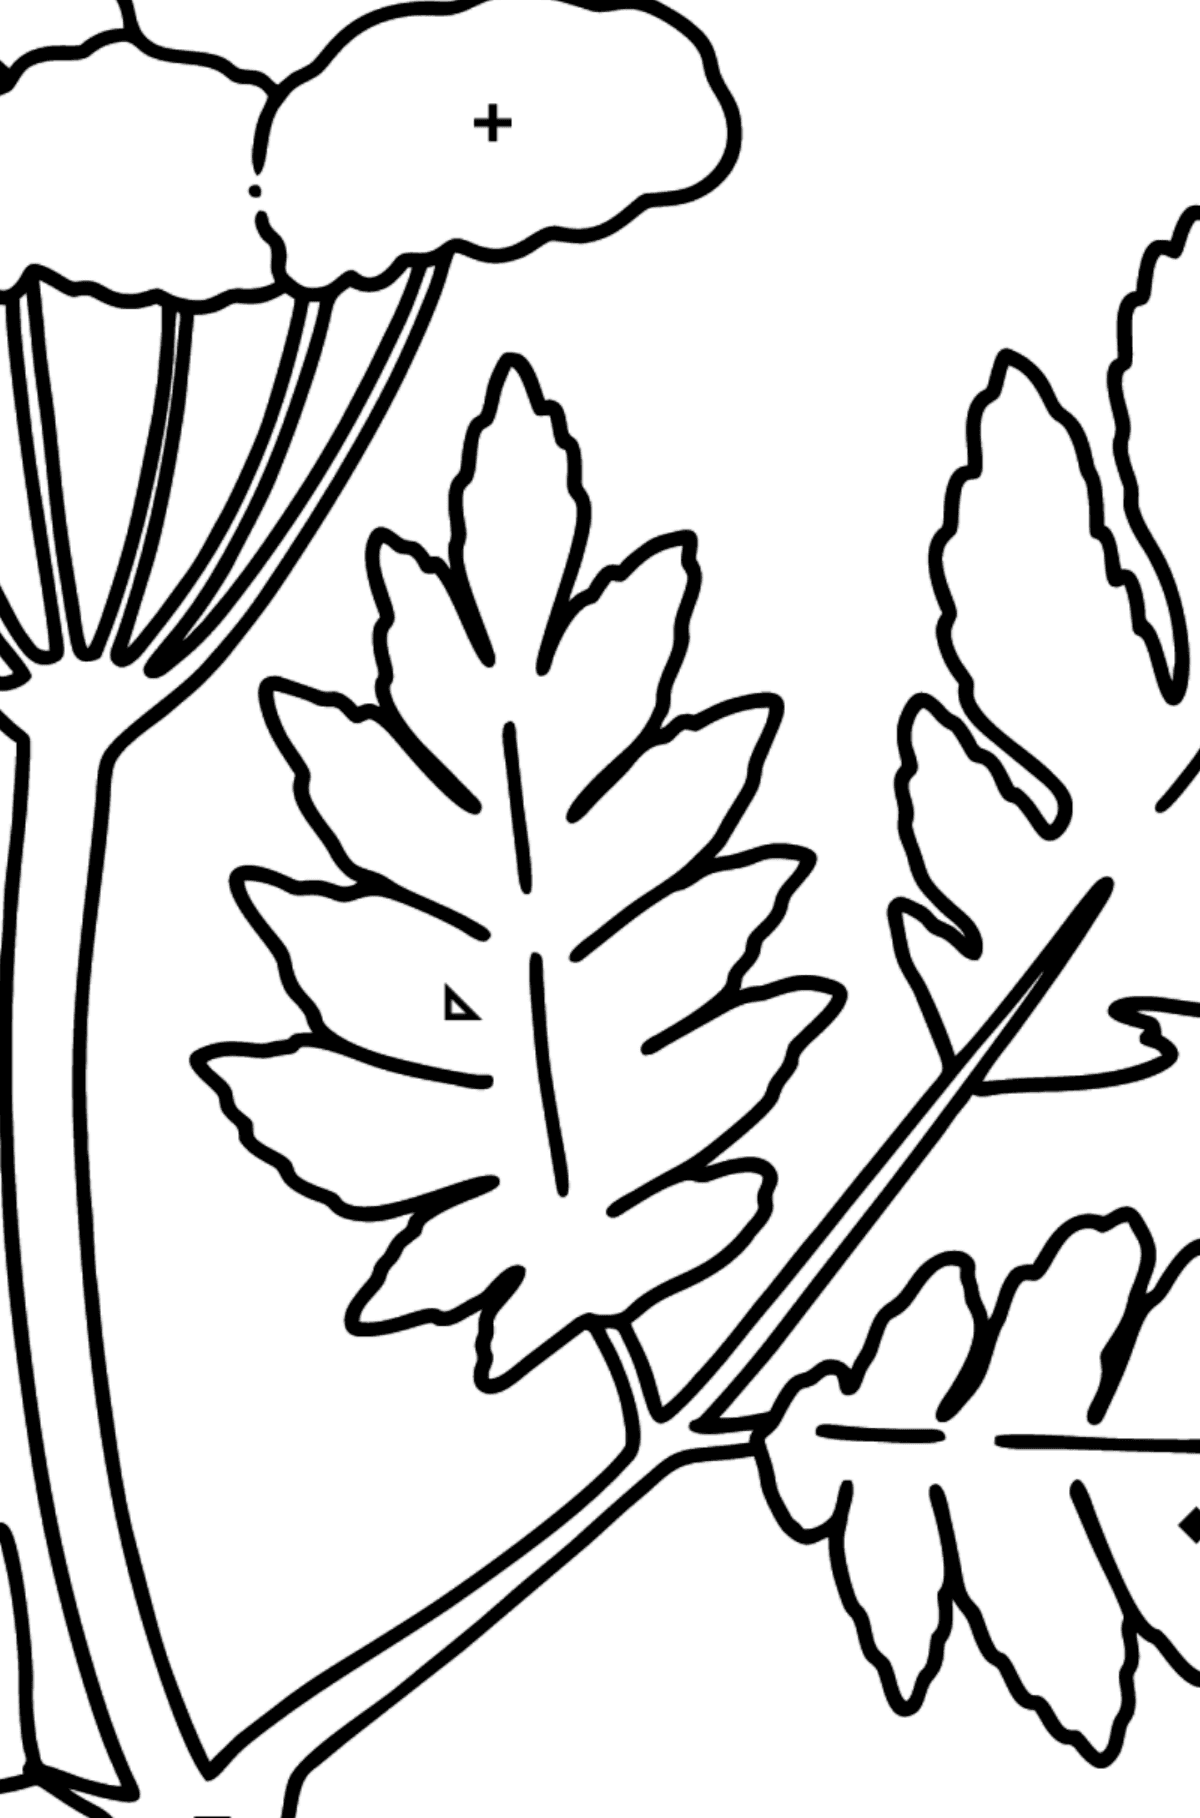 Hemlock coloring page - Coloring by Symbols and Geometric Shapes for Kids